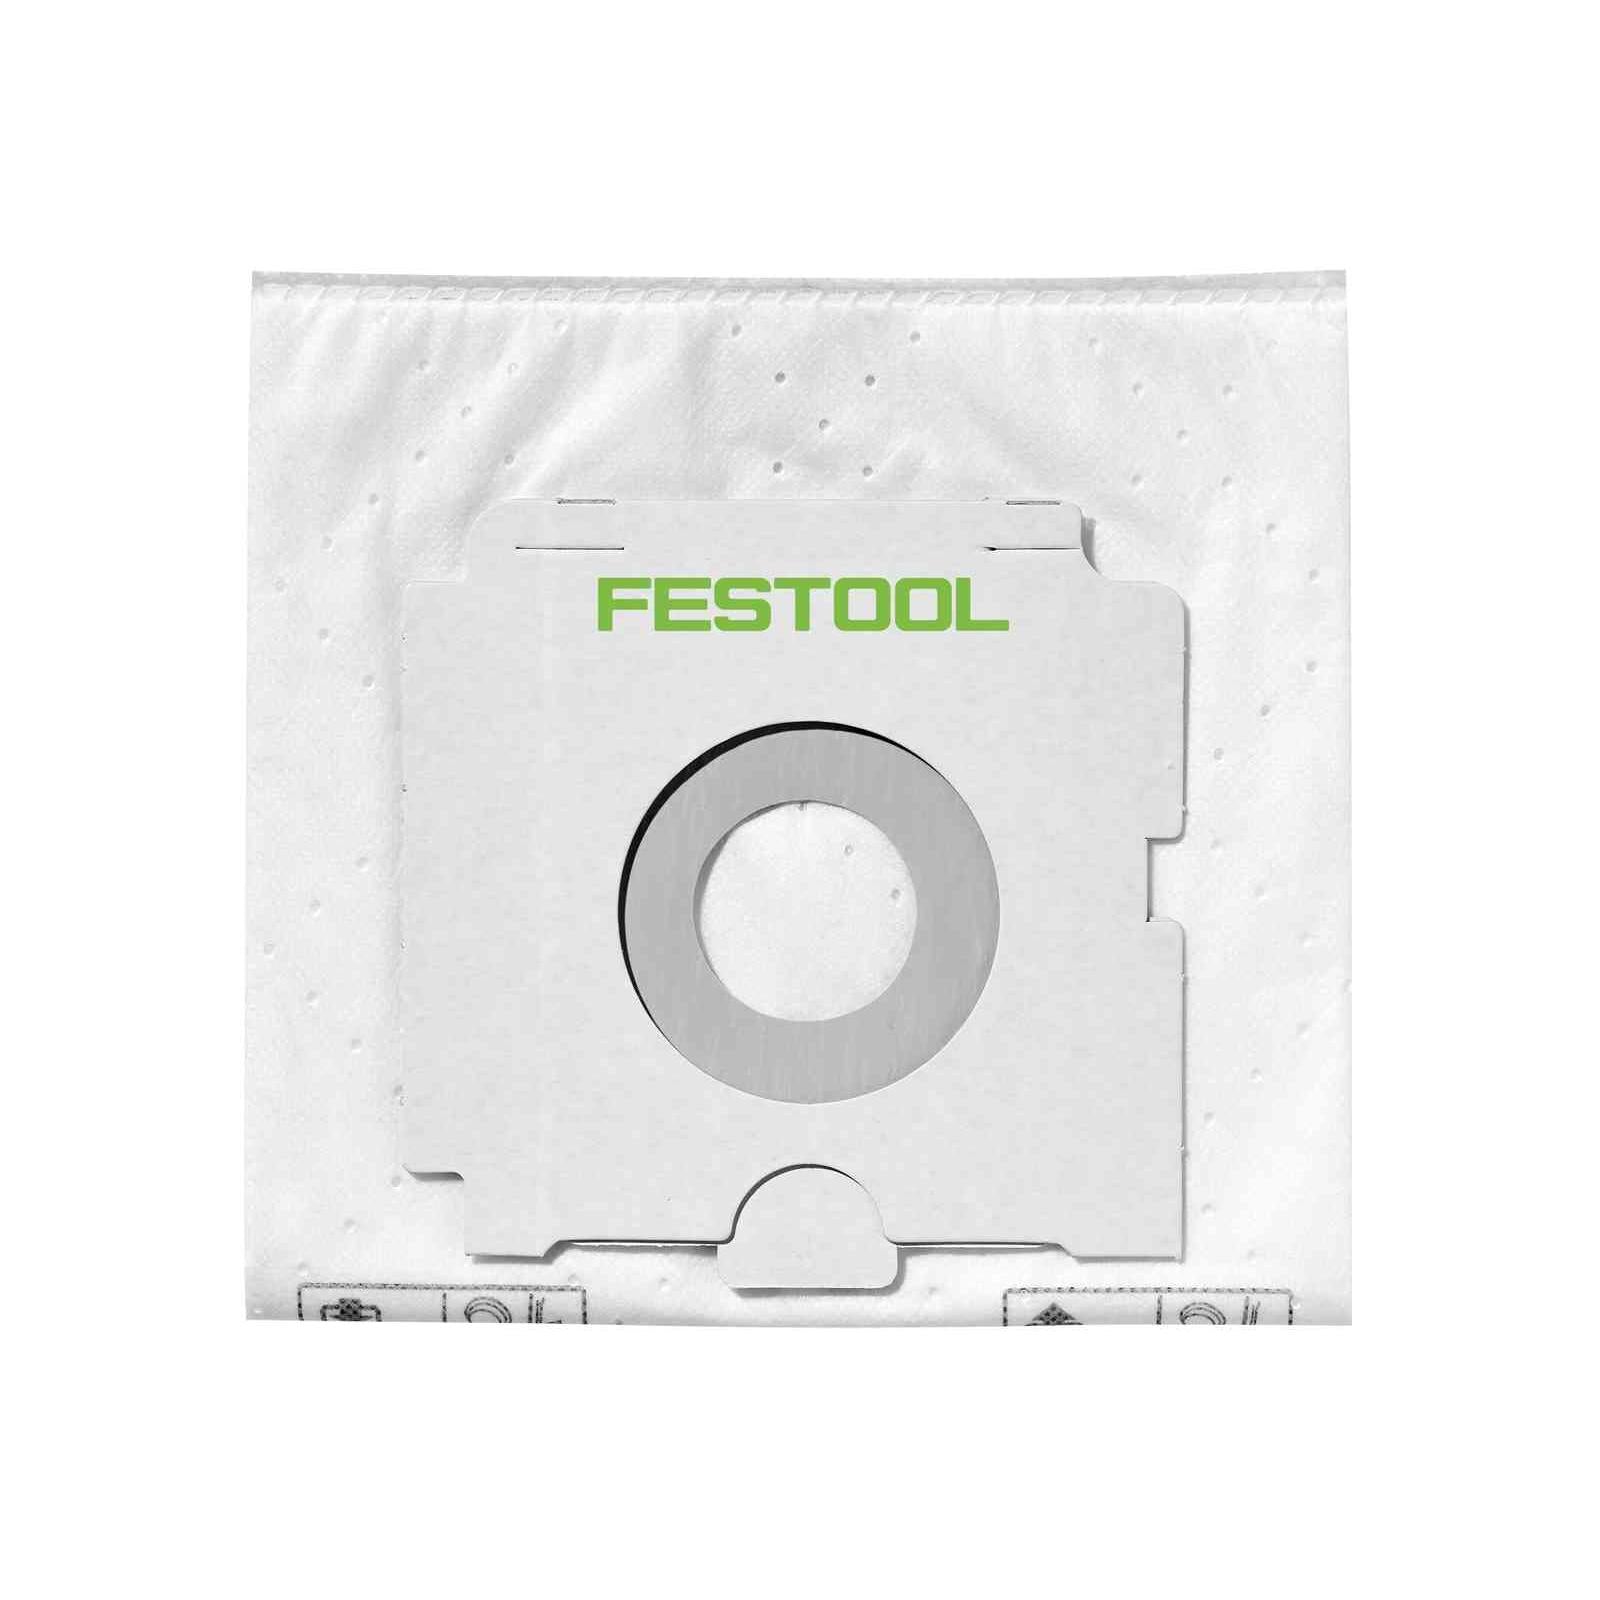 Festool SELFCLEAN filter bag SC FIS-CT 26/5 496187 Power Tool Services